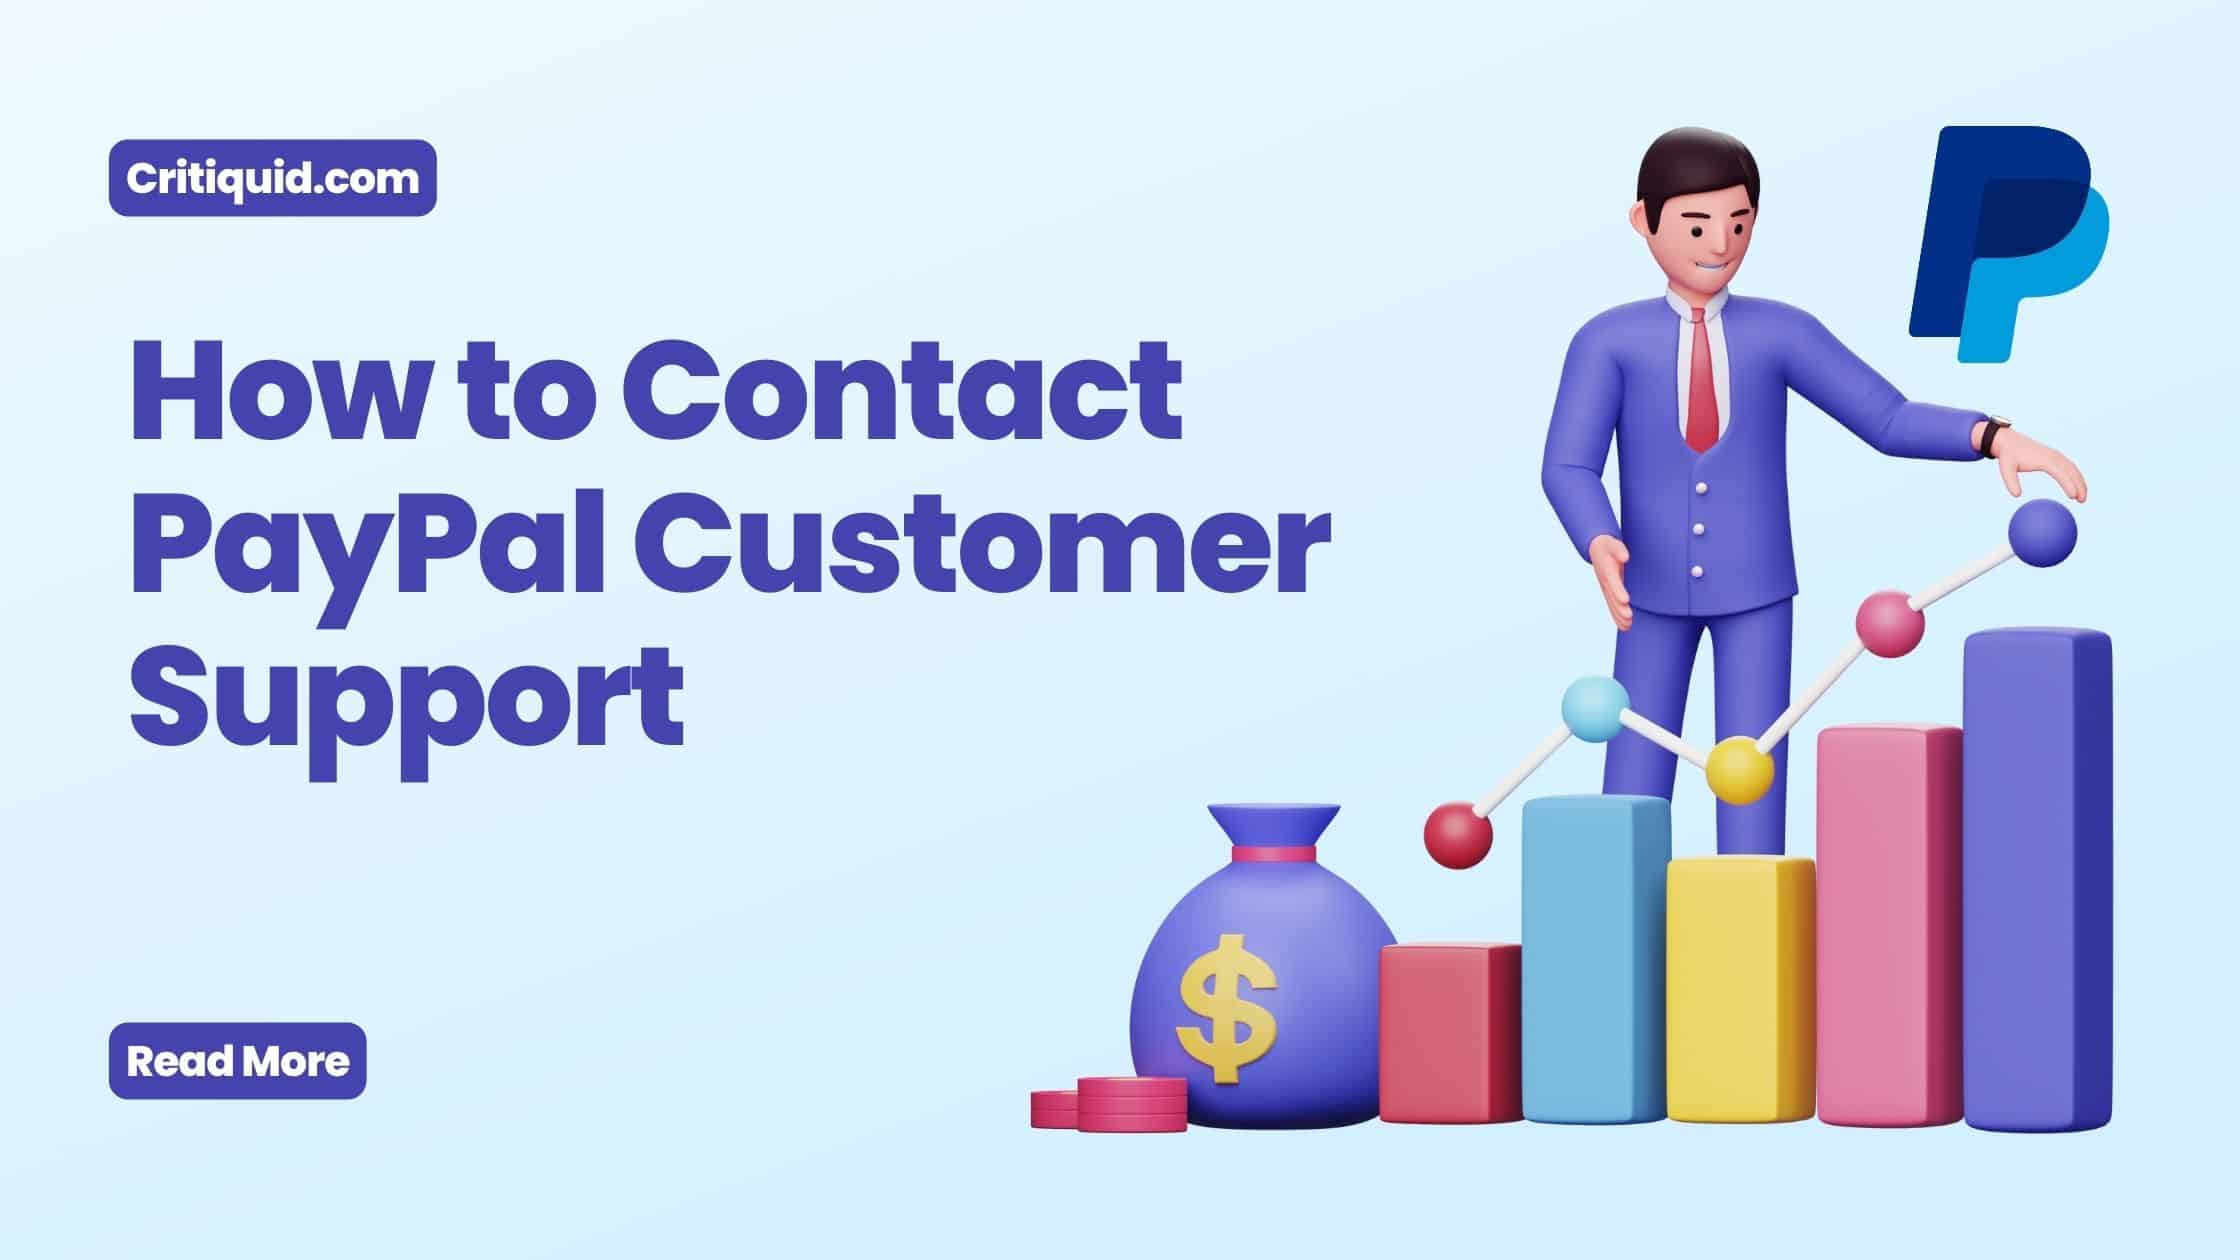 How to Contact PayPal Customer Support